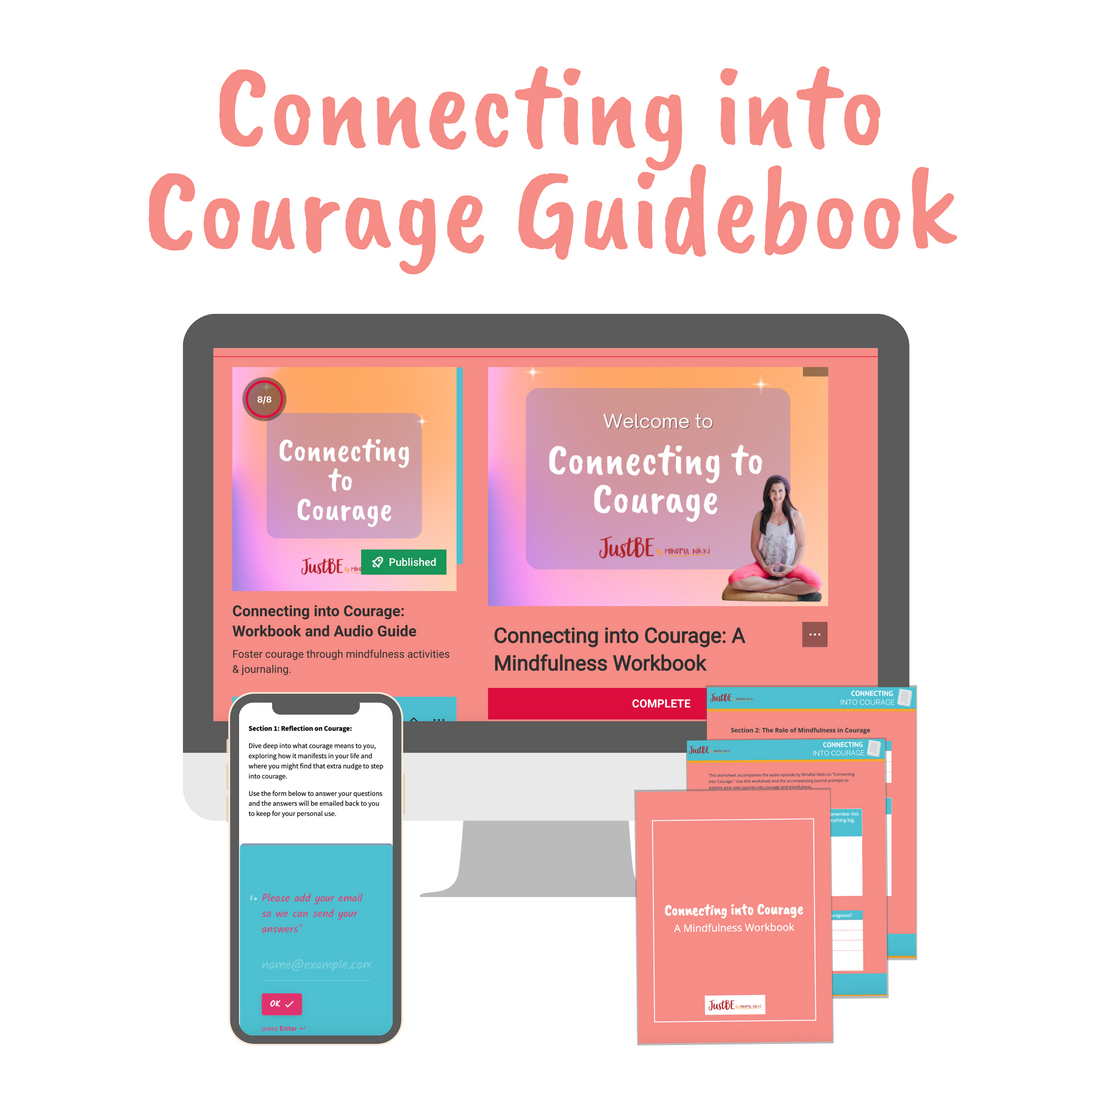 Connecting into Courage Guide Book